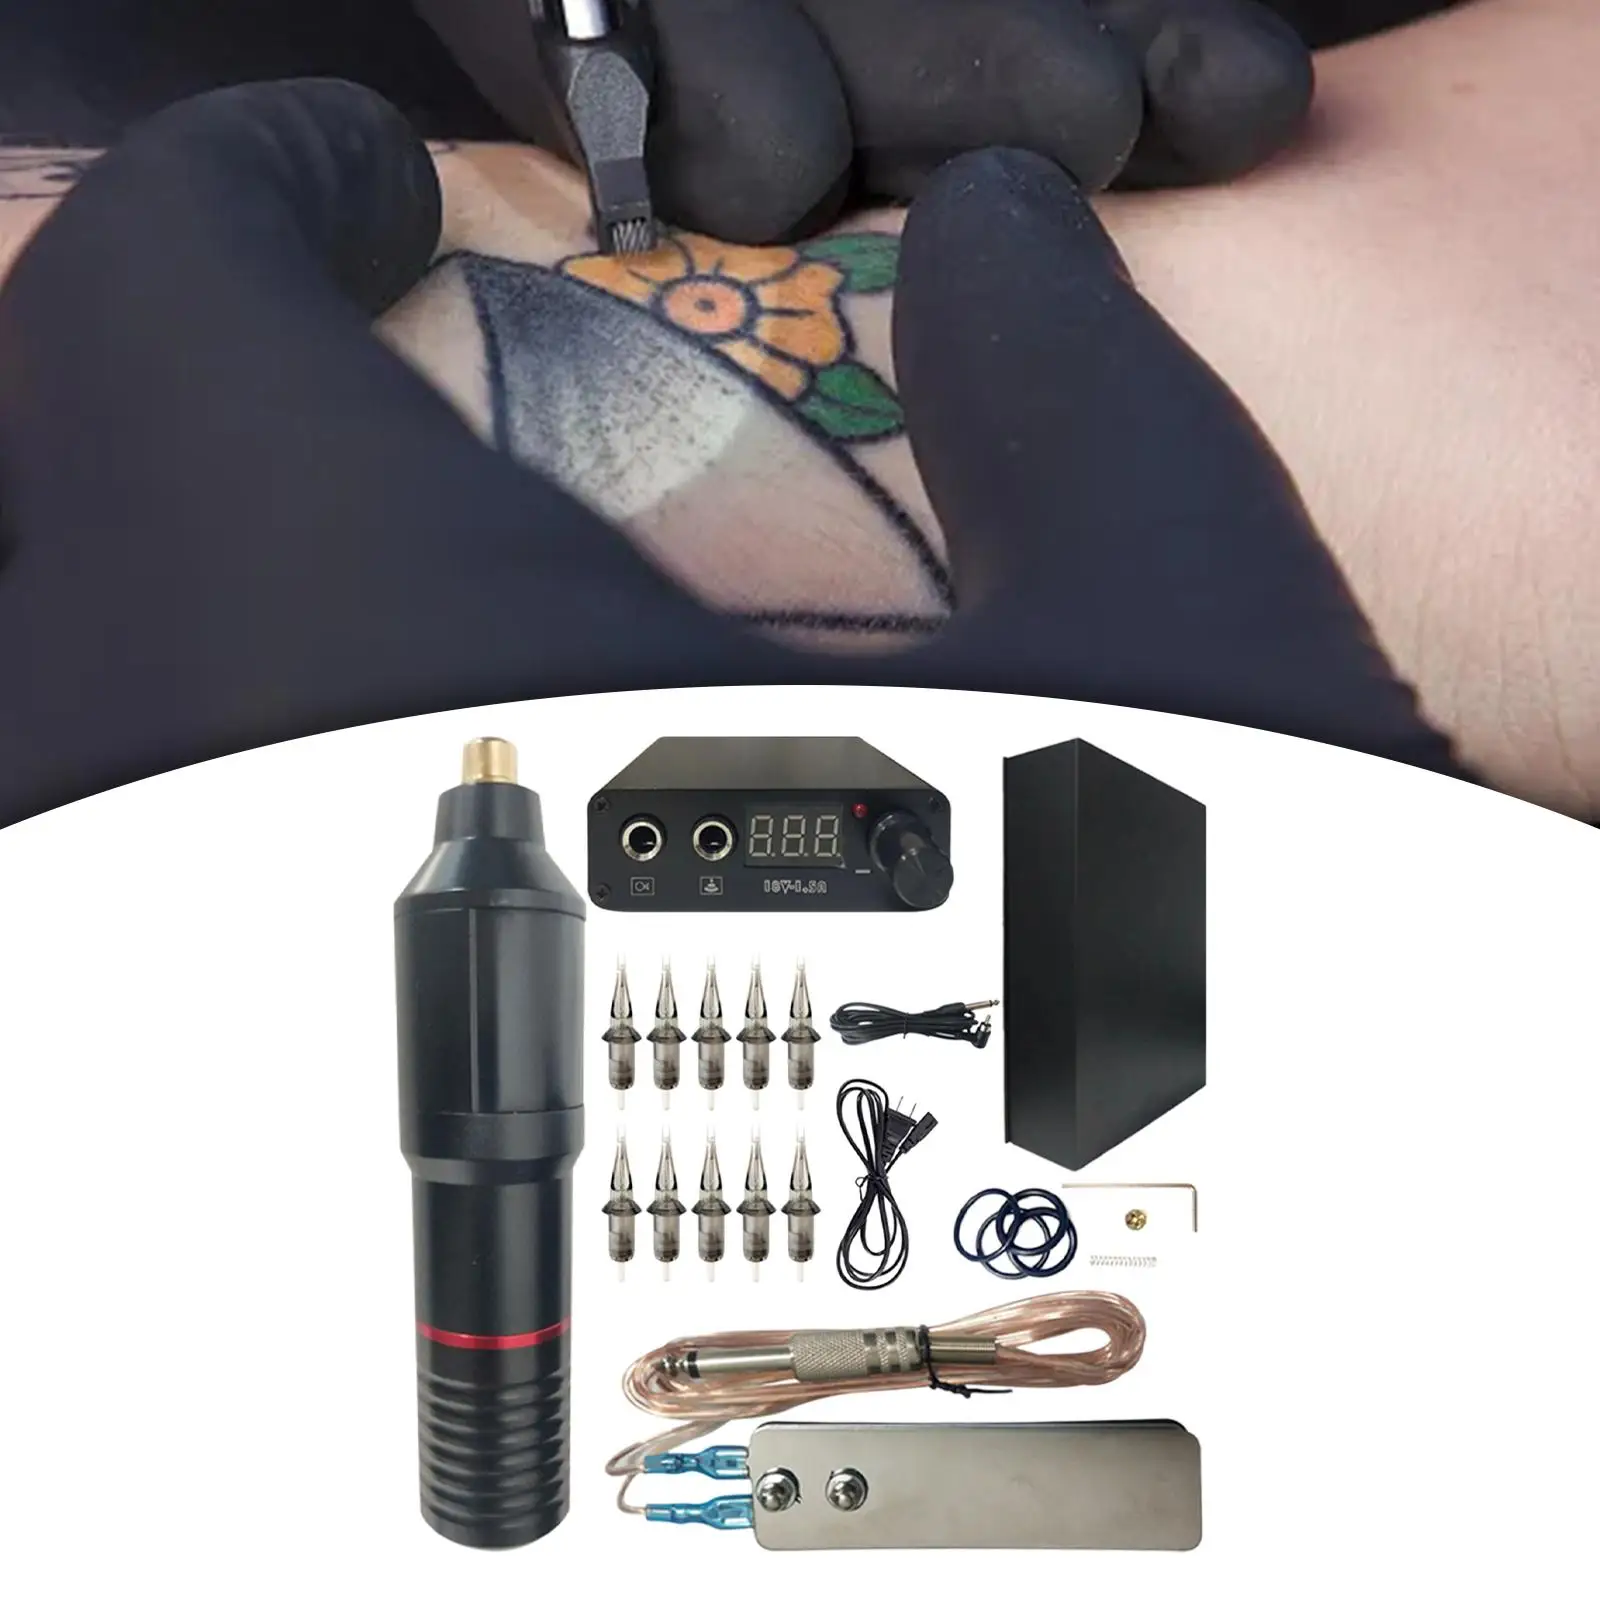 

Tattoo Pen Kit Cartridge Needles Low Noise Foot Pedal Premium Easy to Use Rotary Tattoo Machine Pen for Beginners Tattoo Artists